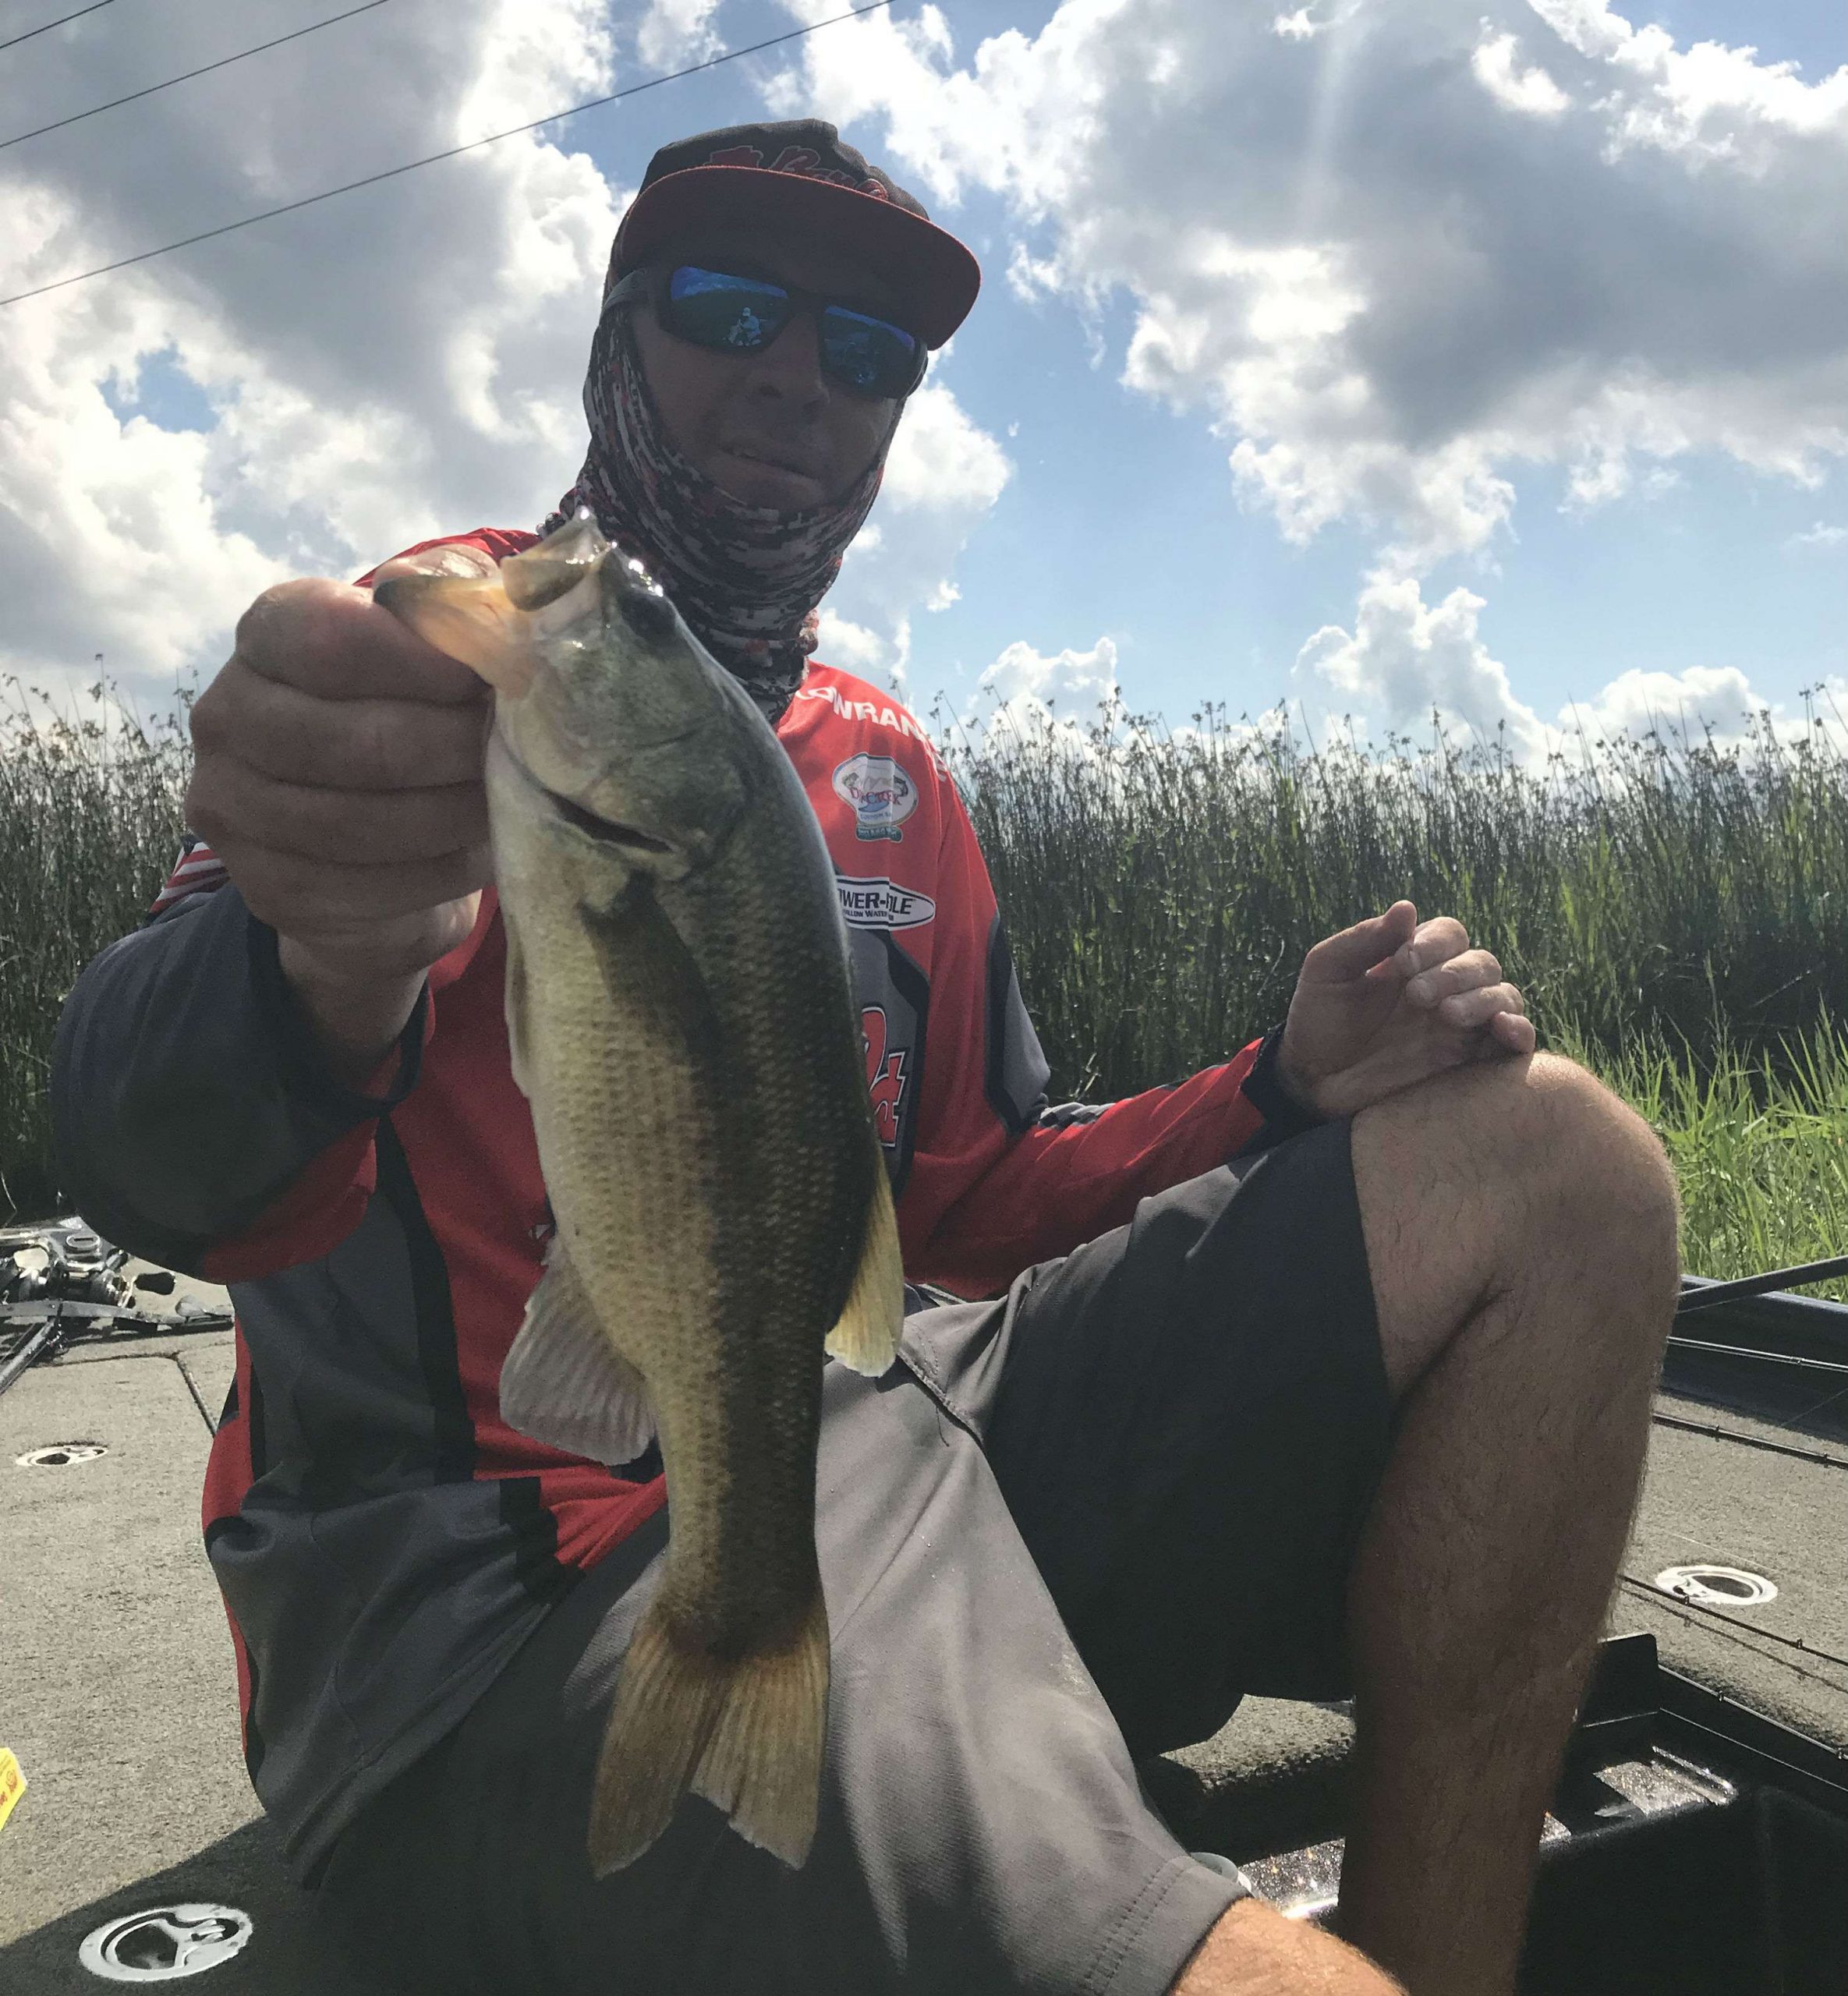 Darrell Ocamica has reached his bag limit of five bass! Now to catch that whopper and cull out the smaller ones in the livewell! 